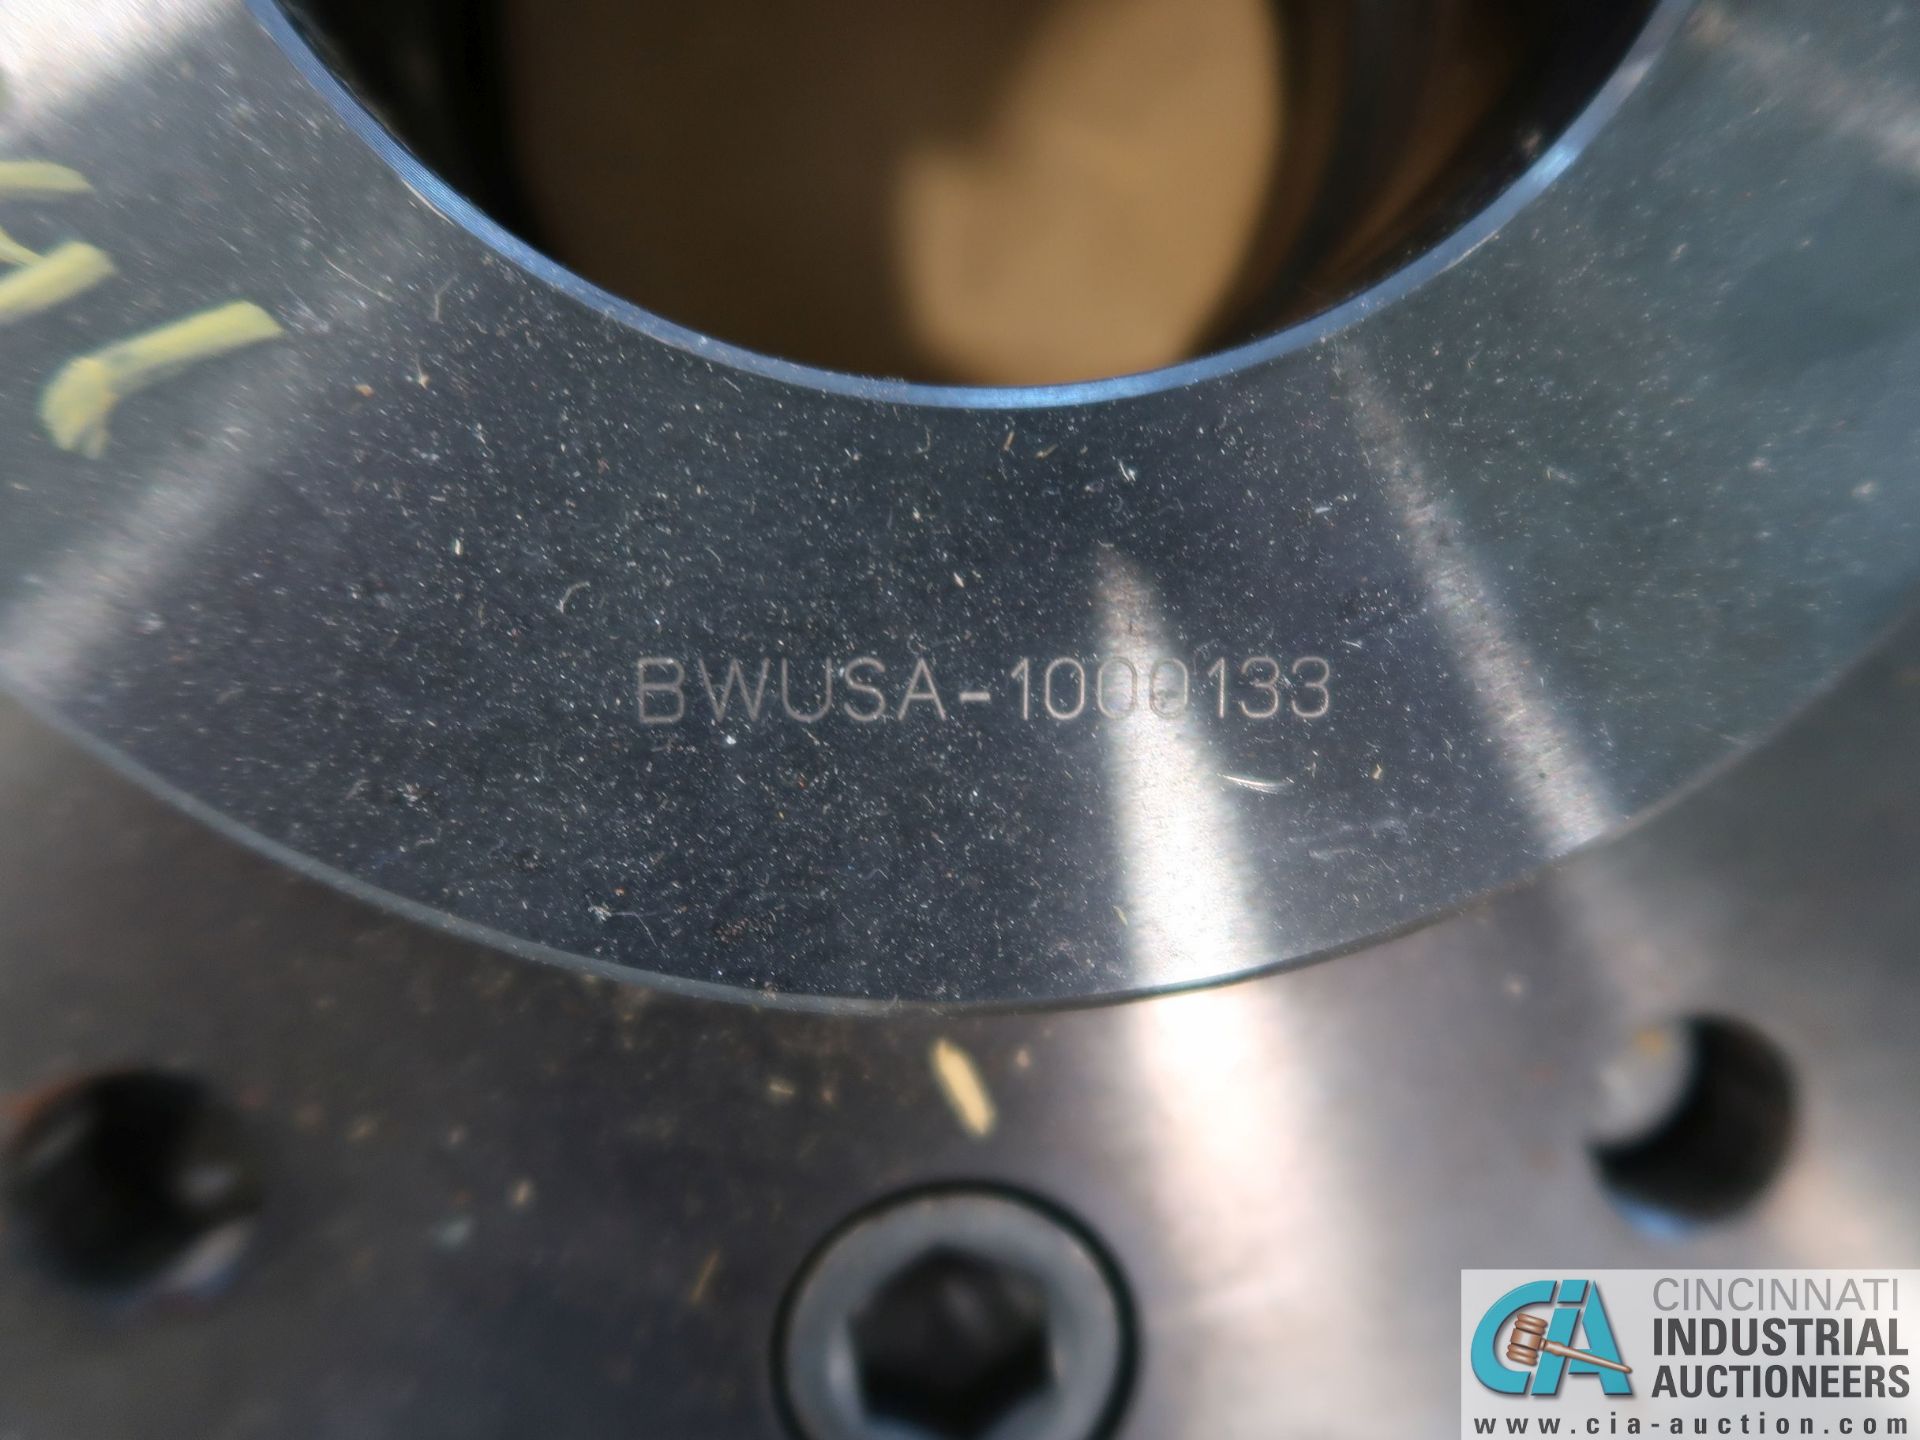 BANYAN #B1086 INDEXIBLE GEAR MILLING CUTTER - Image 4 of 6